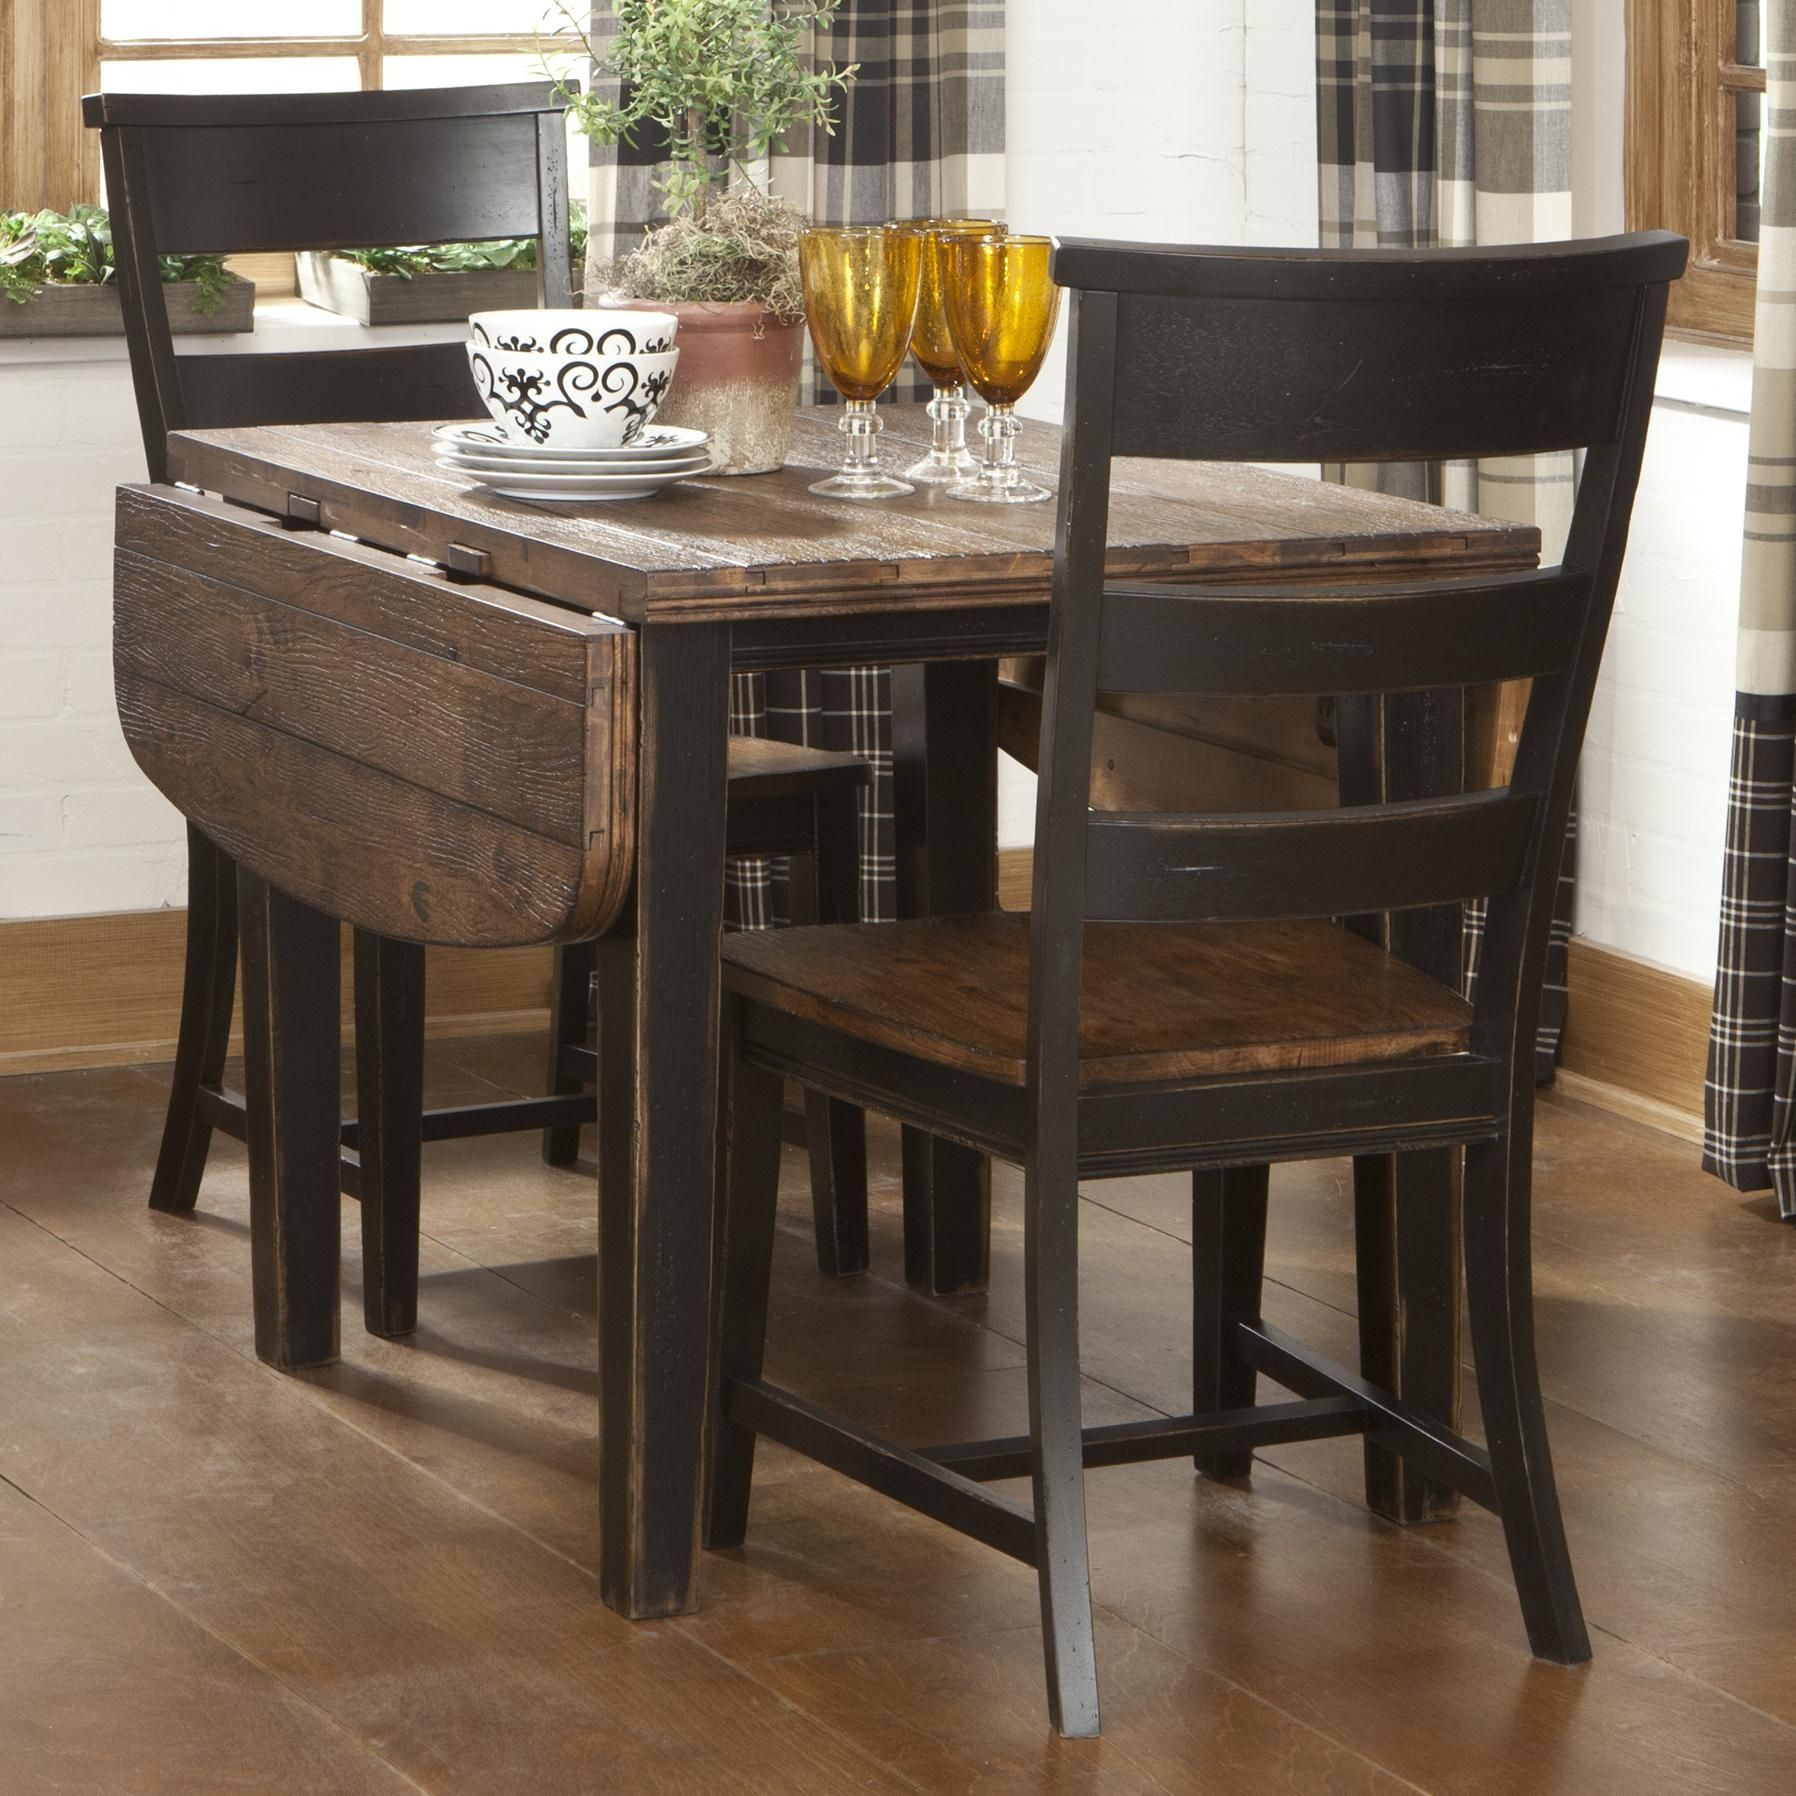 Rustic Kitchen Bench
 Types of rustic kitchen tables and chairs